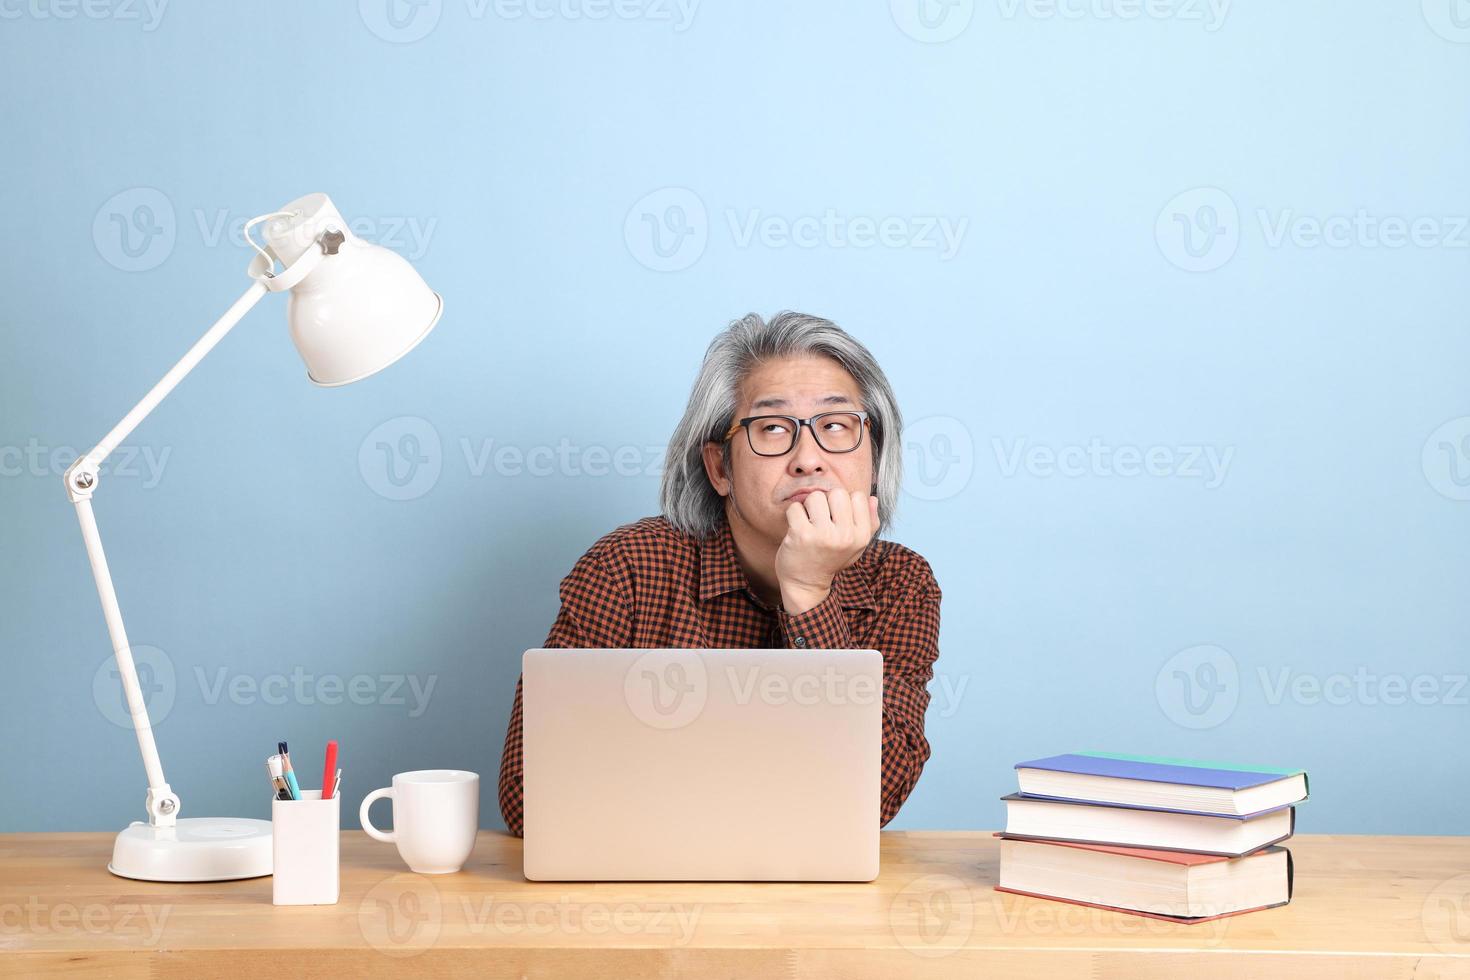 Man with Laptop photo